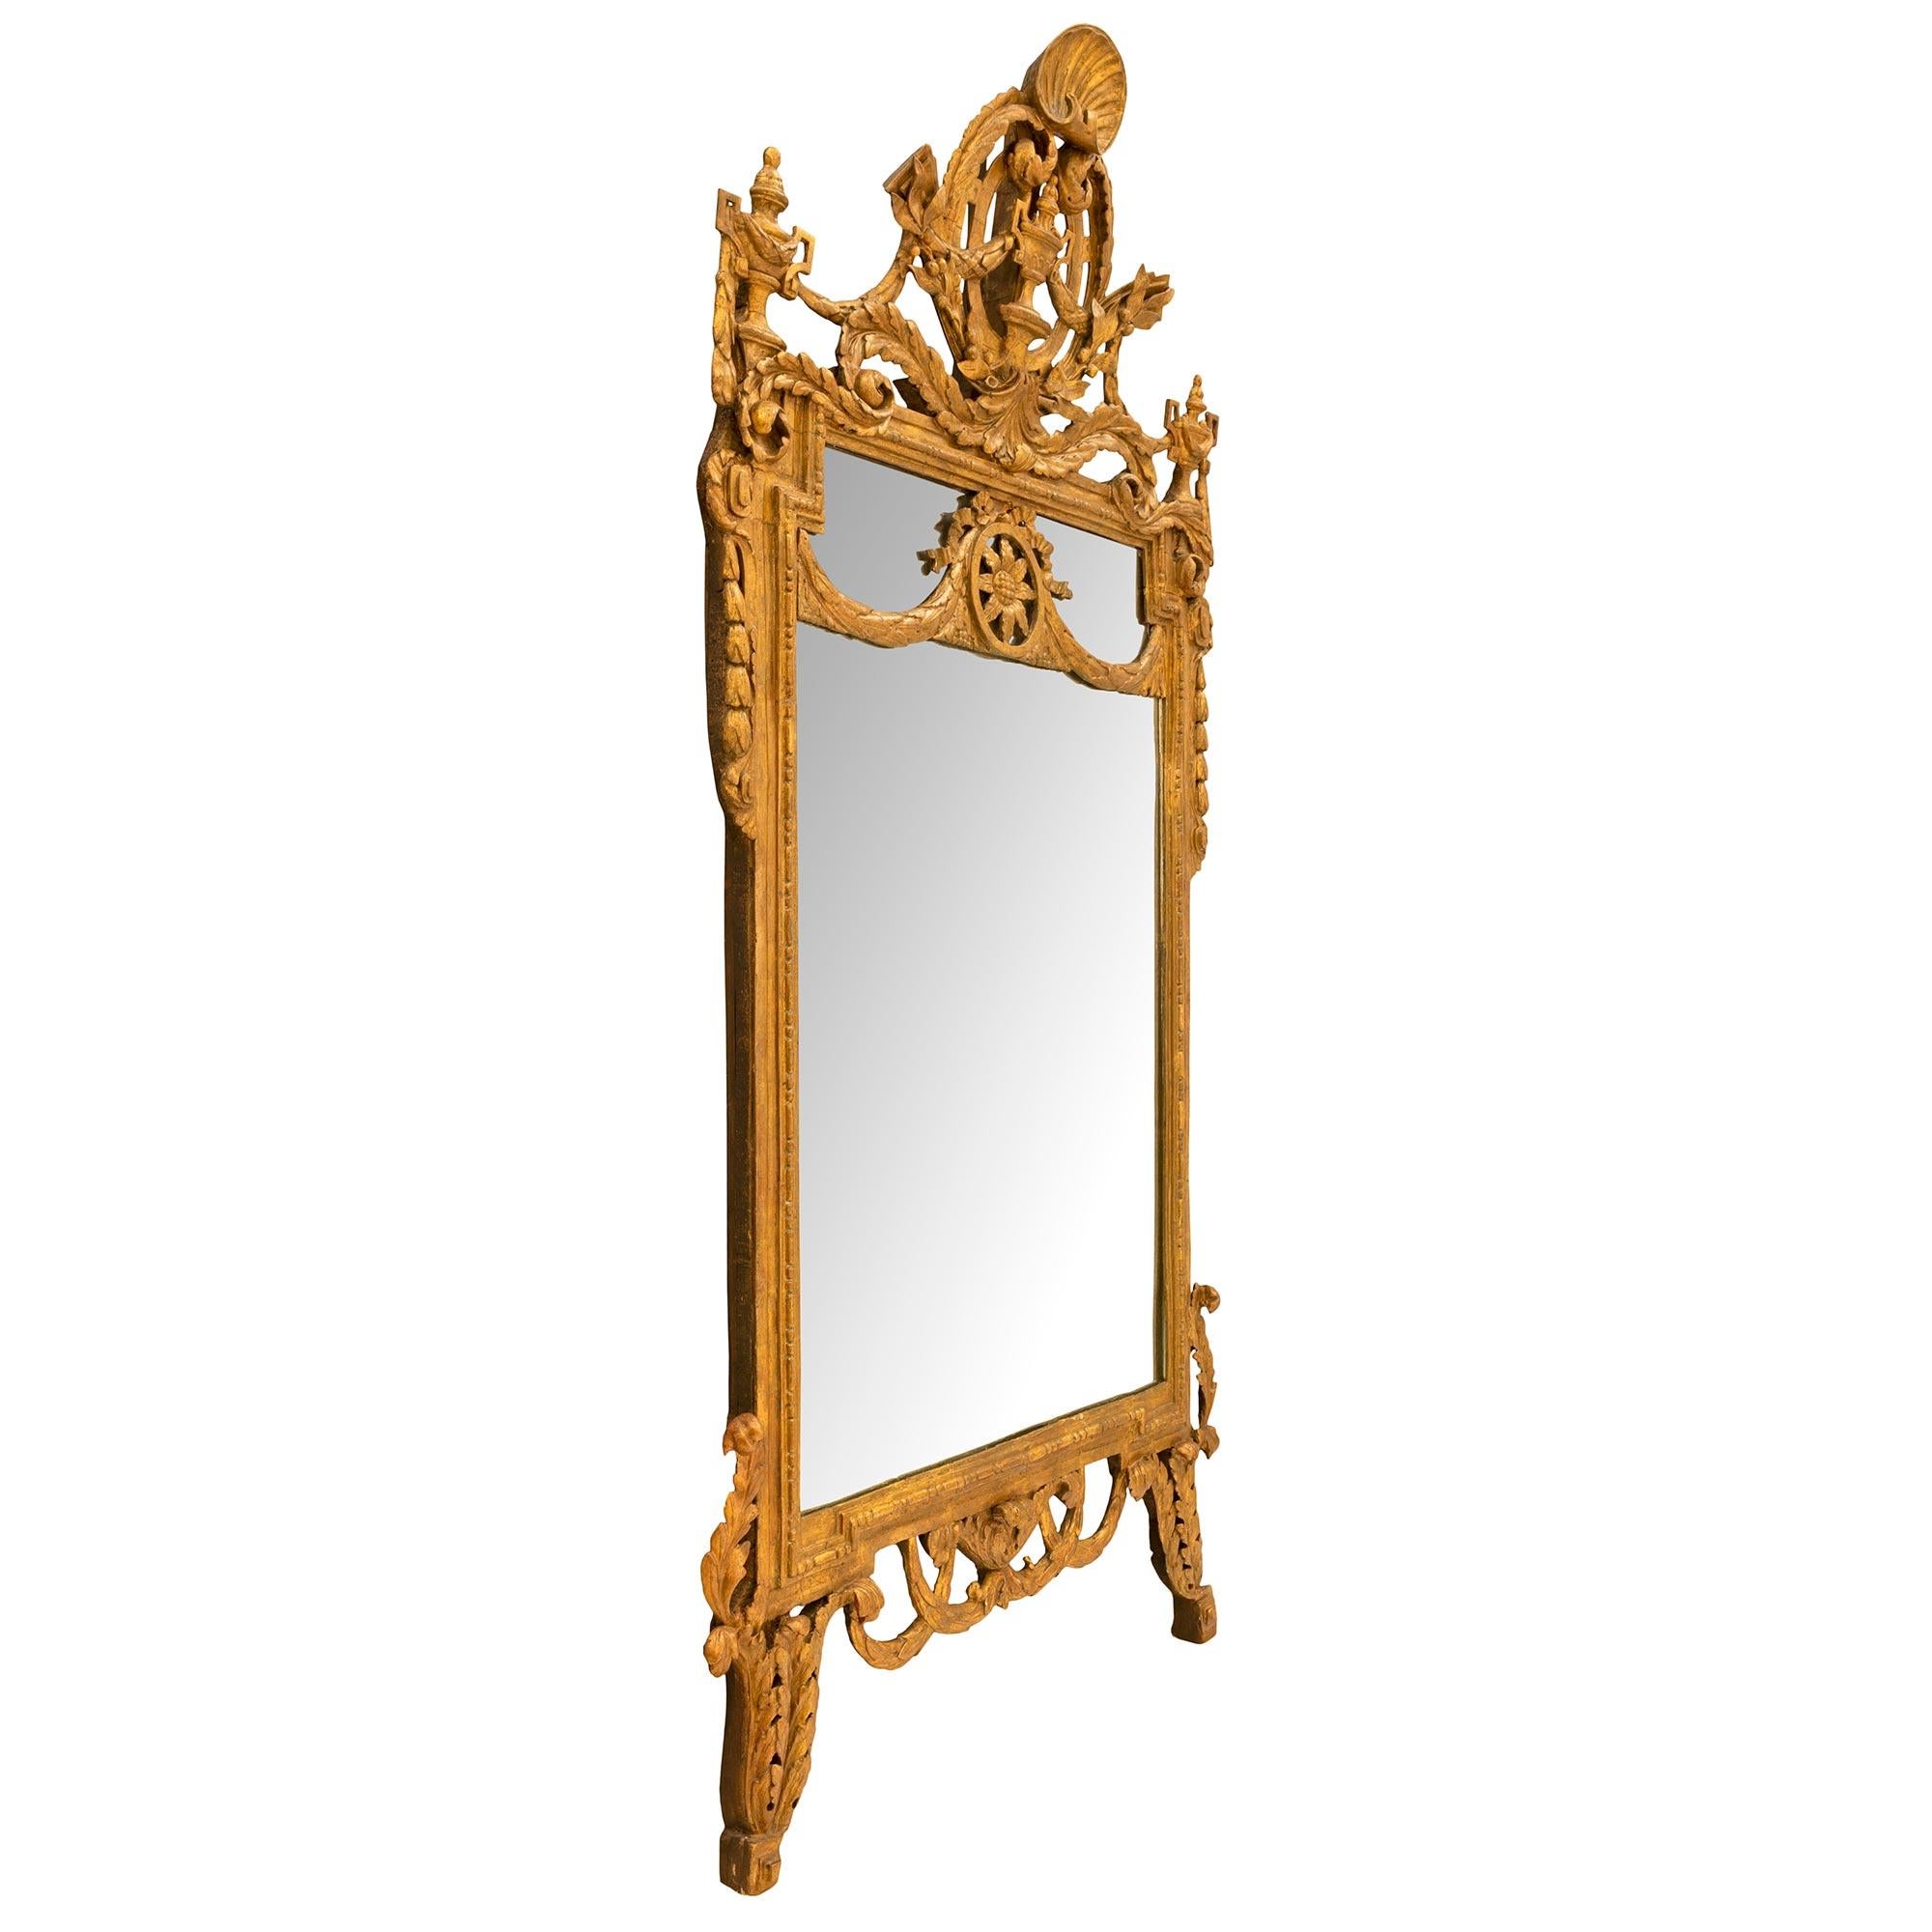 Italian 18th Century Giltwood Mirror In Good Condition For Sale In West Palm Beach, FL